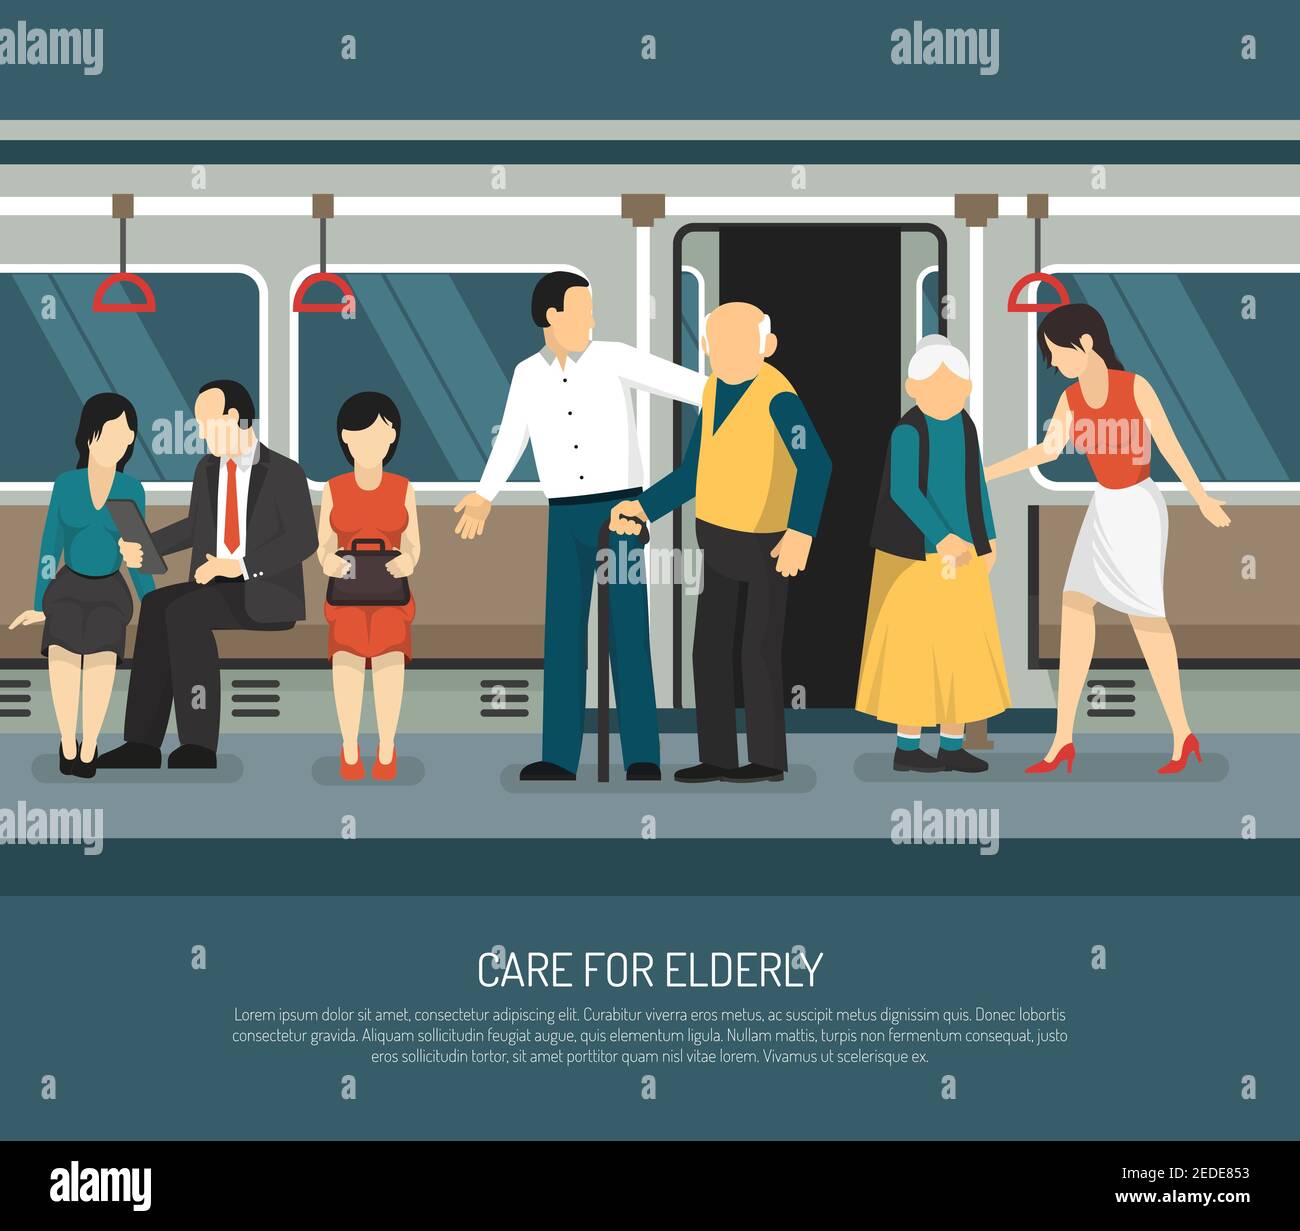 Care for elderly scene in subway car  with young man and woman helping old passengers vector illustration Stock Vector